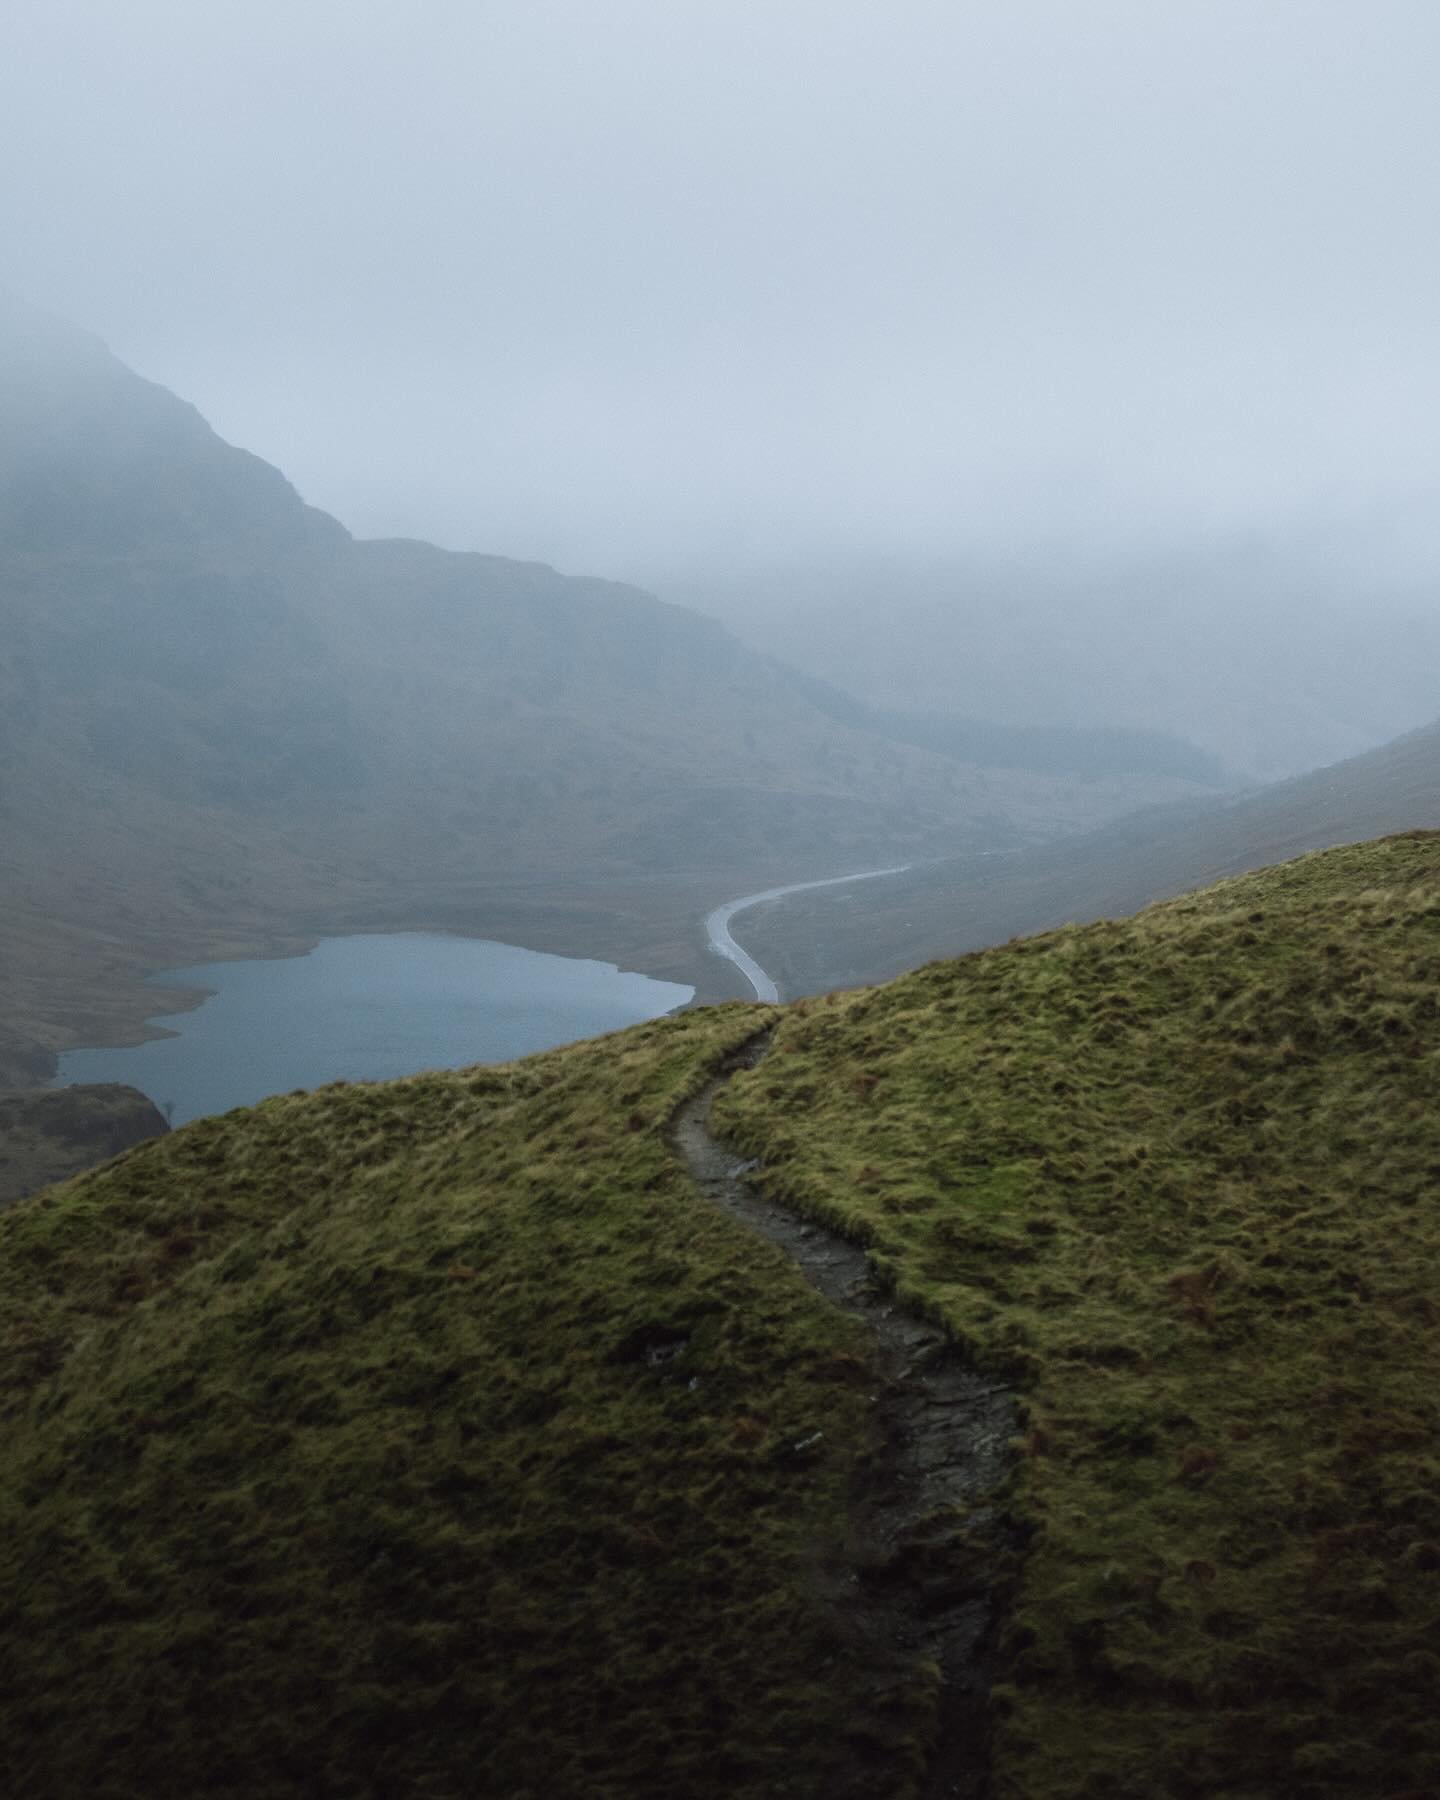 Moody days on the Scottish hills.  Excited to have a few more days on the hills soon. Those light evenings are the best! 

#arrochar #arrocharalps #scotland #moodyscotland #scotlandiscalling #munrobagging #hiking #oex #gooutdoors #thisisscotland #sim